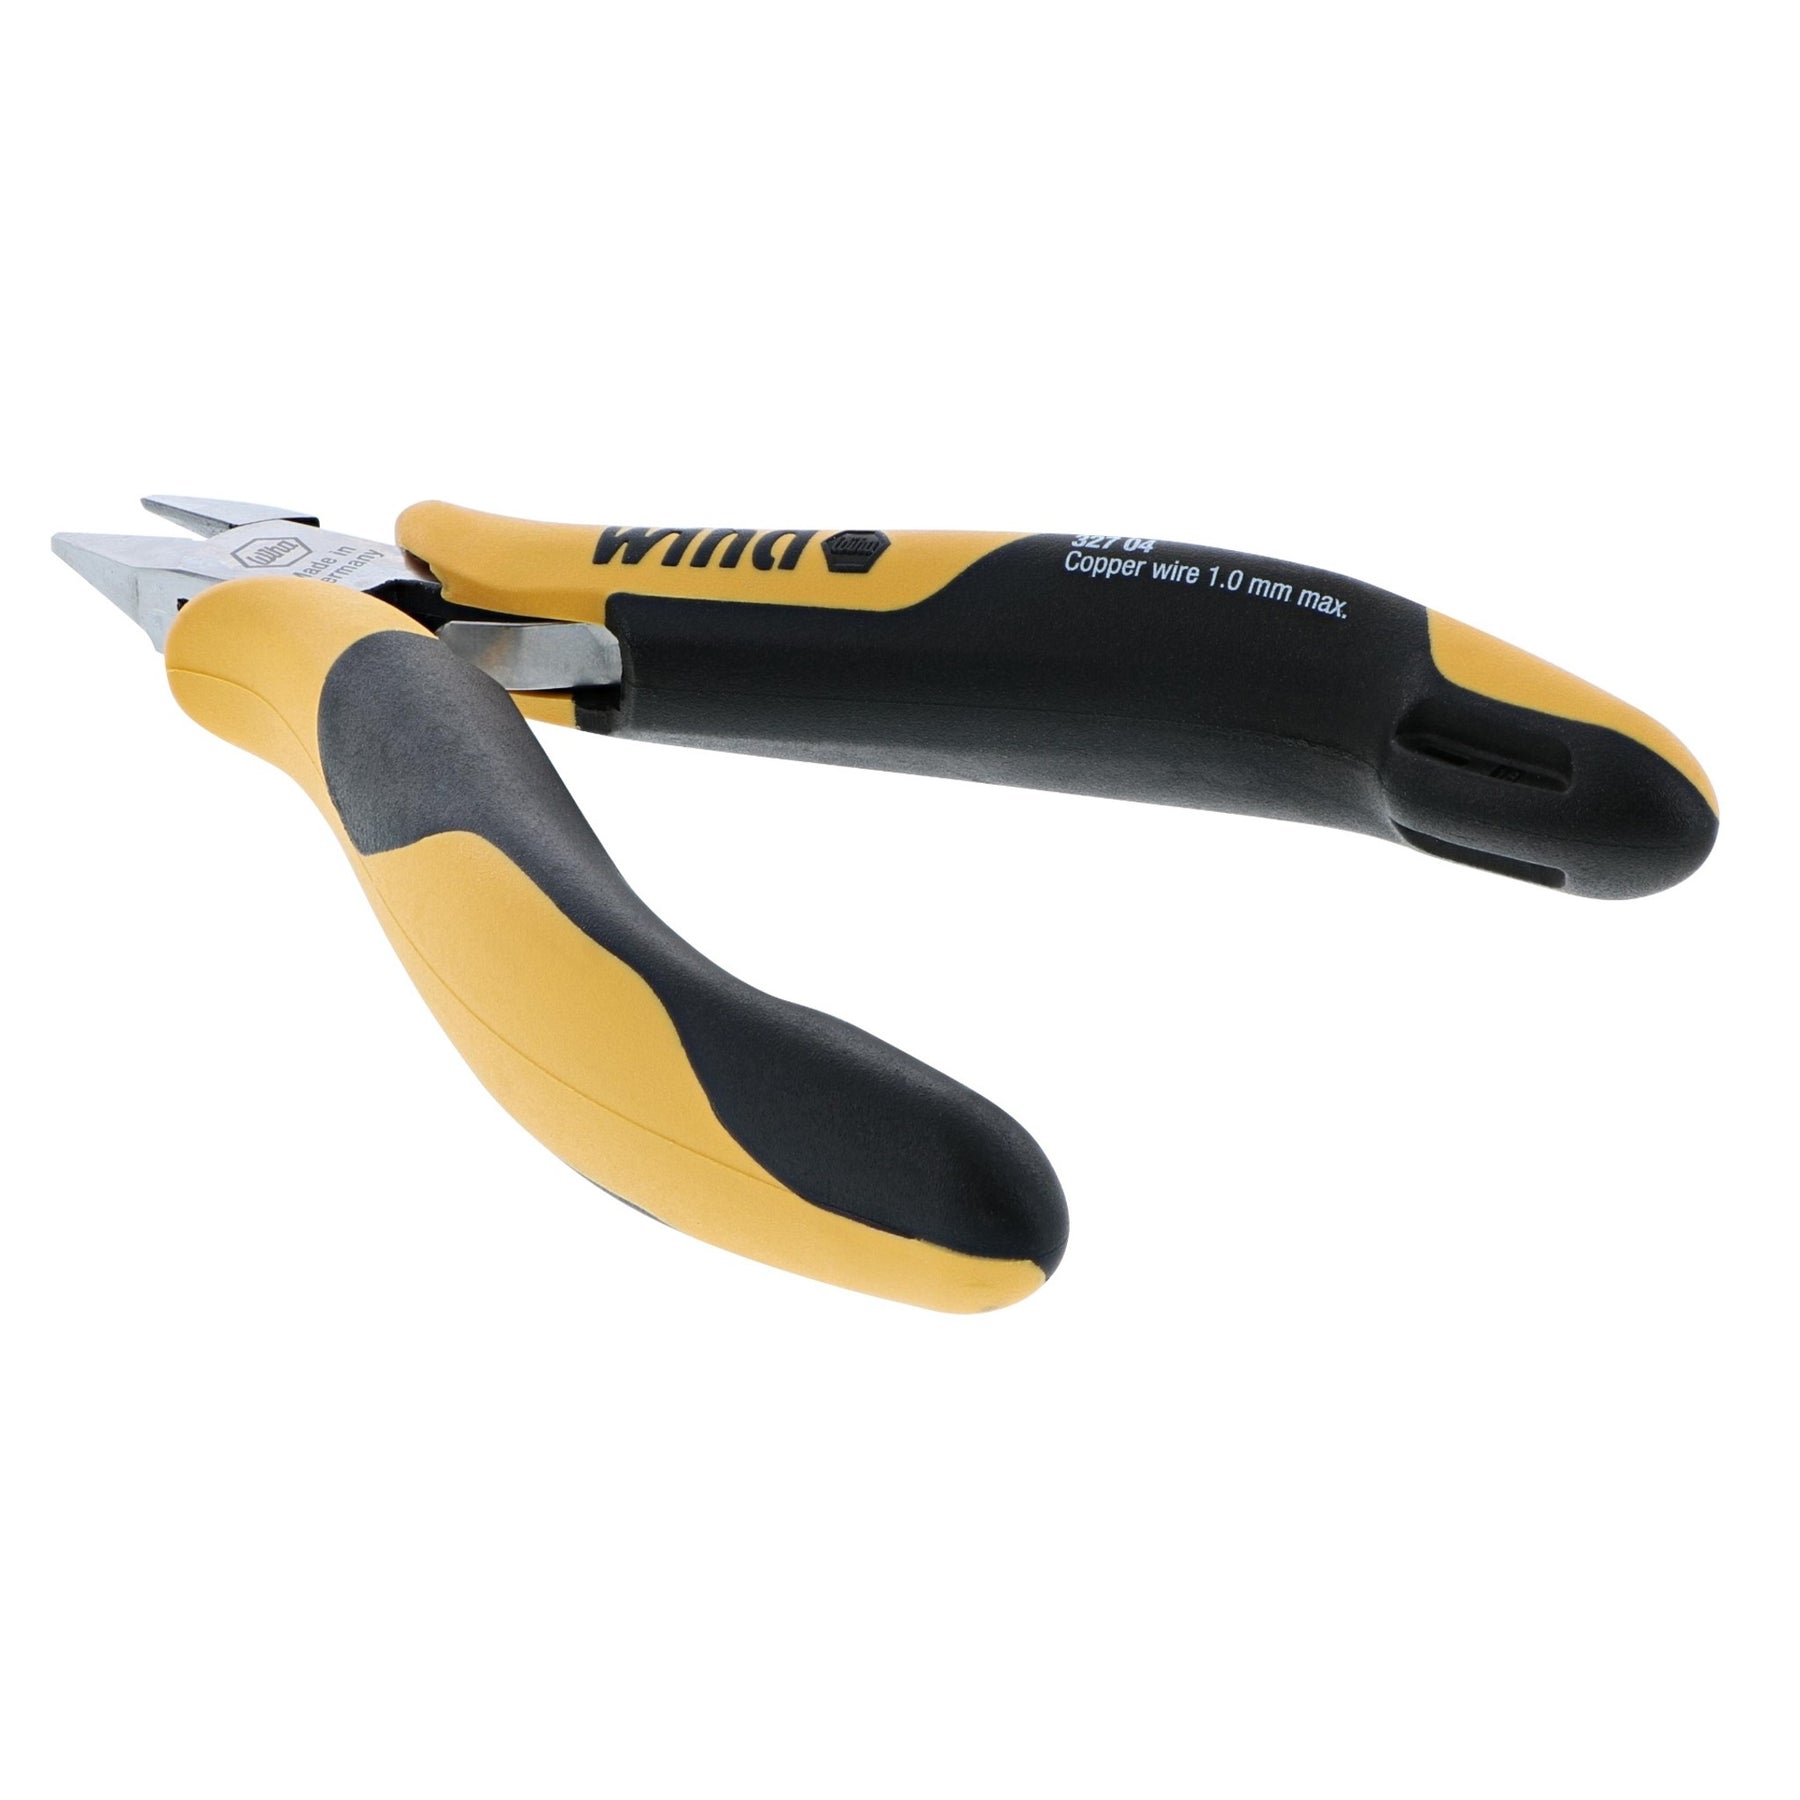 ESD Safe Precision Tapered Head Flush Cutters